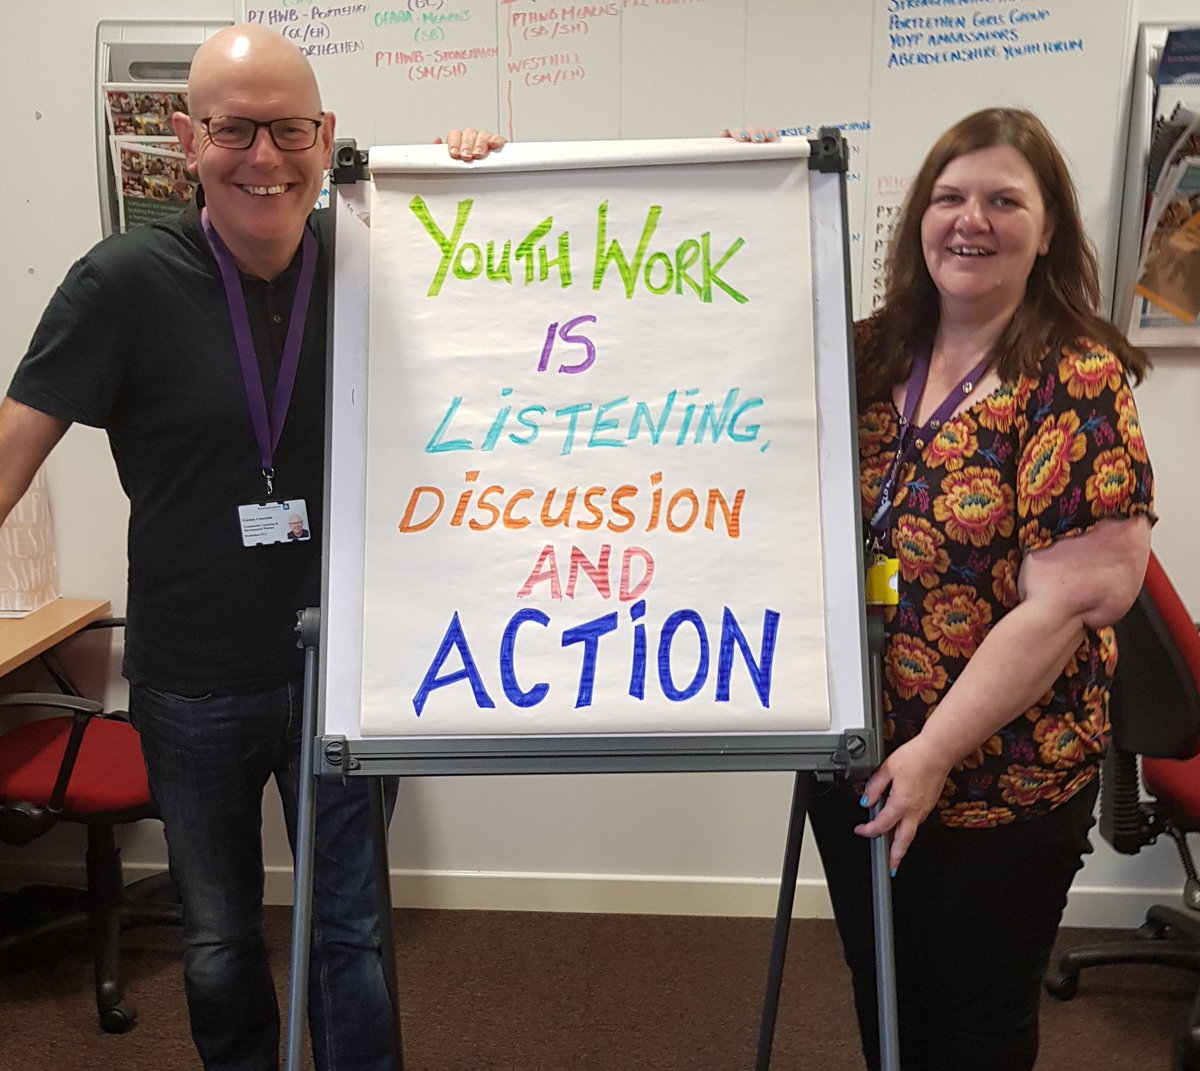 Youth work is ..... opportunity
#YWW18 #ThisIsYouthWork #YouthWorkChangesLives #becauseofcld